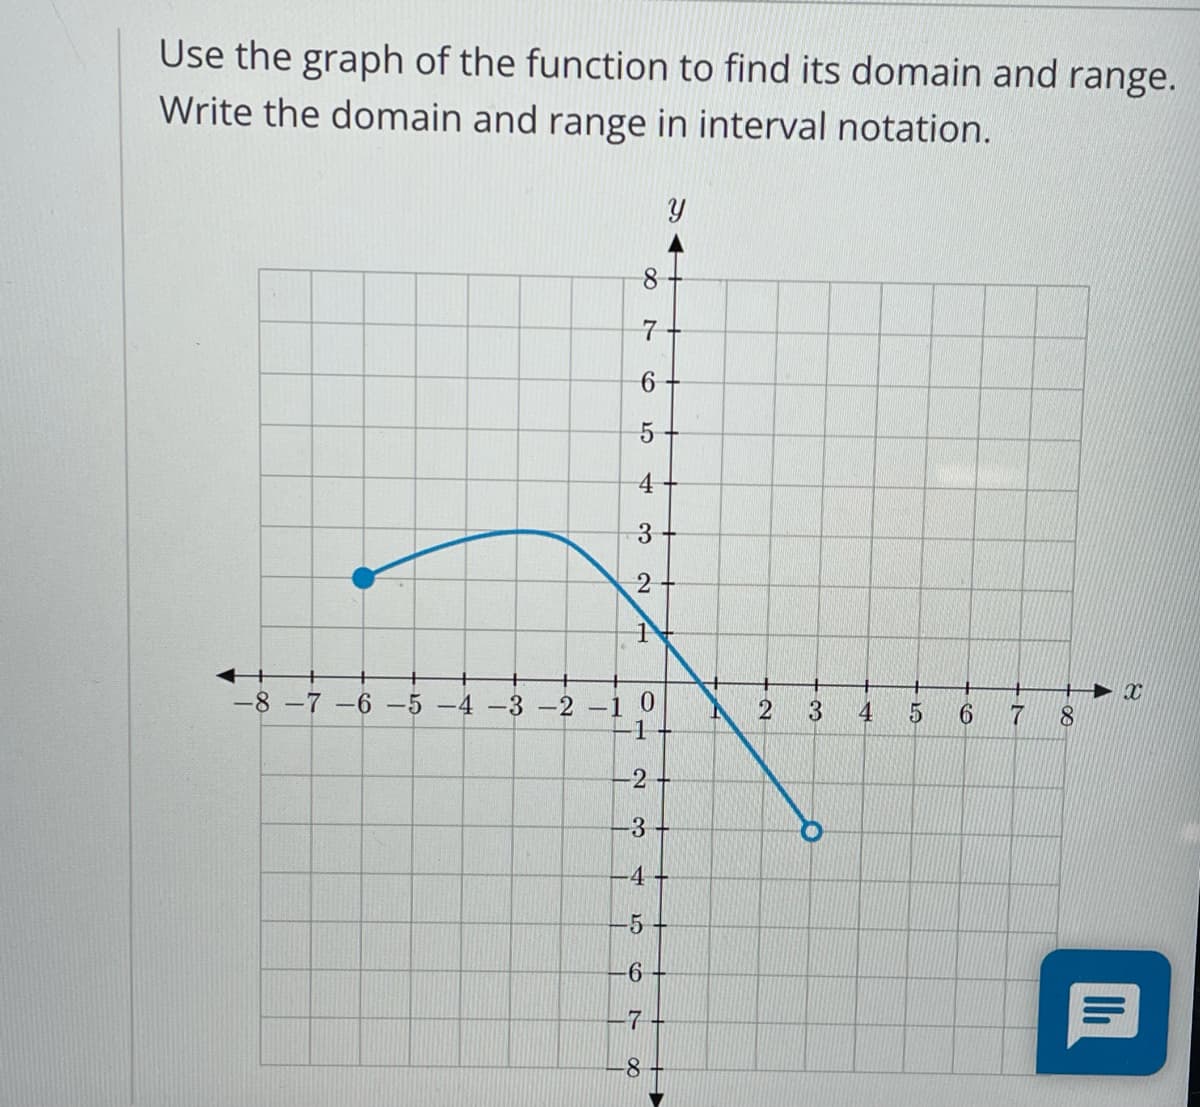 Use the graph of the function to find its domain and range.
Write the domain and range in interval notation.
4+
3
-8-7 -6 -5 -4 -3 -2-1 0
-1
4
5 6
7
-2
-3
-4 +
-5
-8
8.
6.
2]
